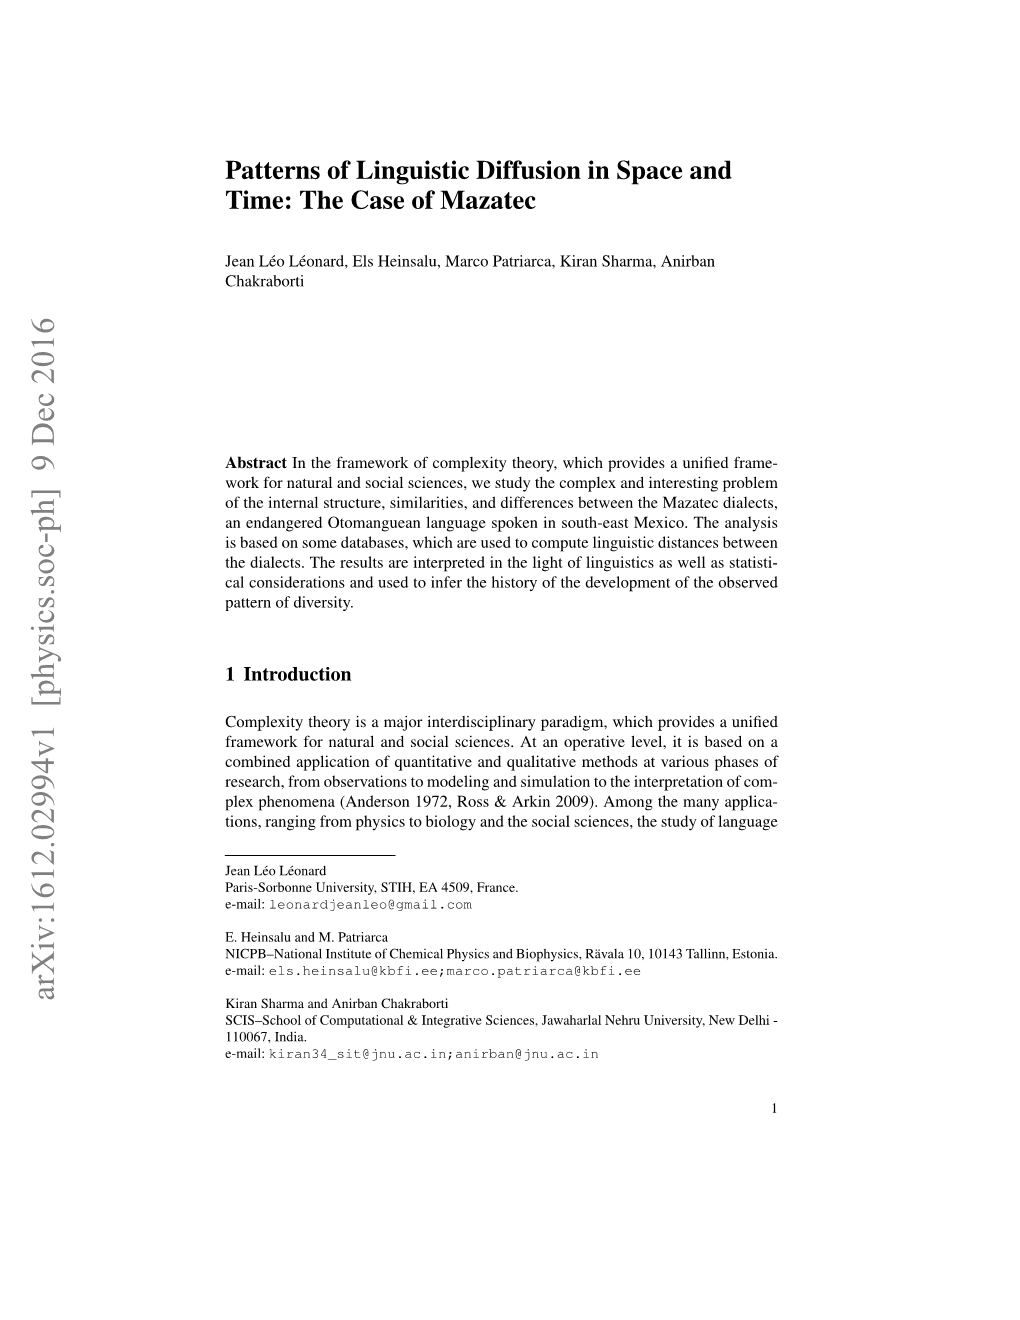 Patterns of Linguistic Diffusion in Space and Time: the Case of Mazatec